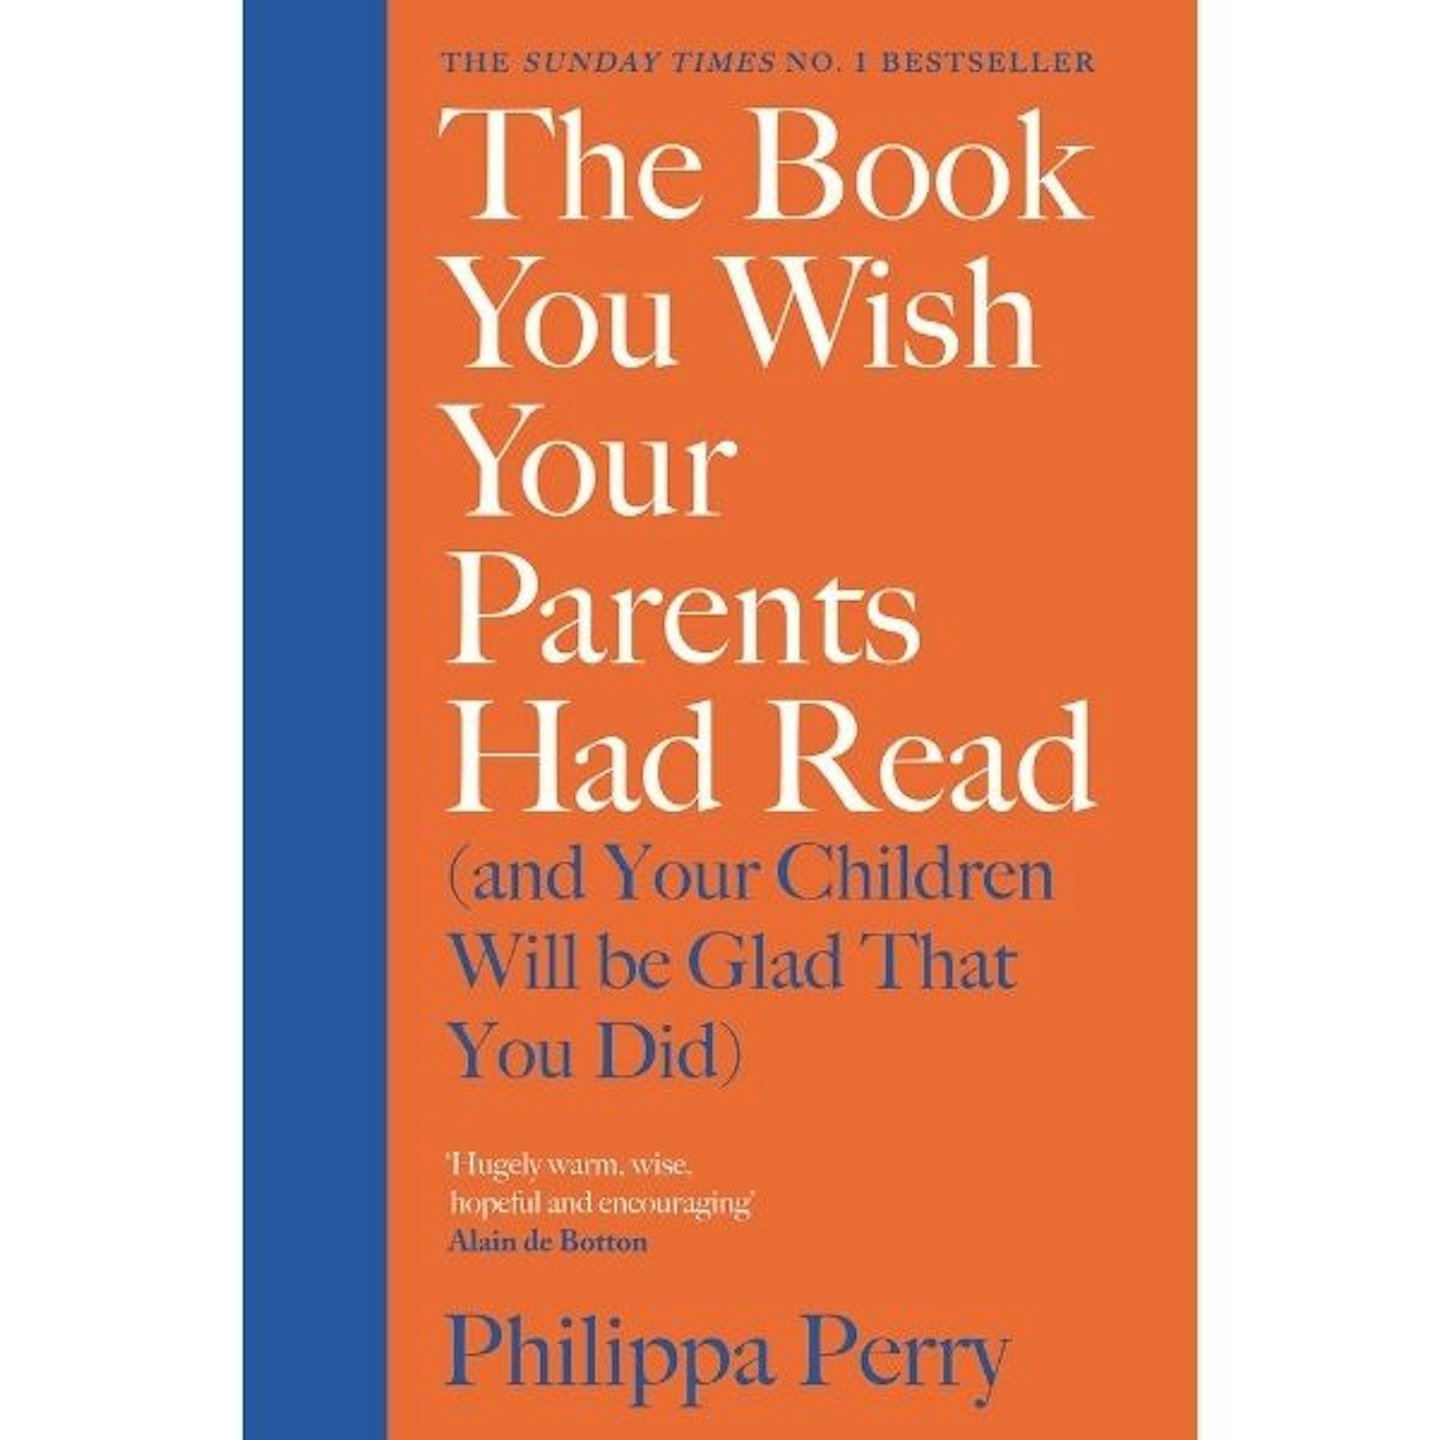 The Book You Wish Your Parents Had Read (And Your Children Will Be Glad That You Did), By Philippa Perry